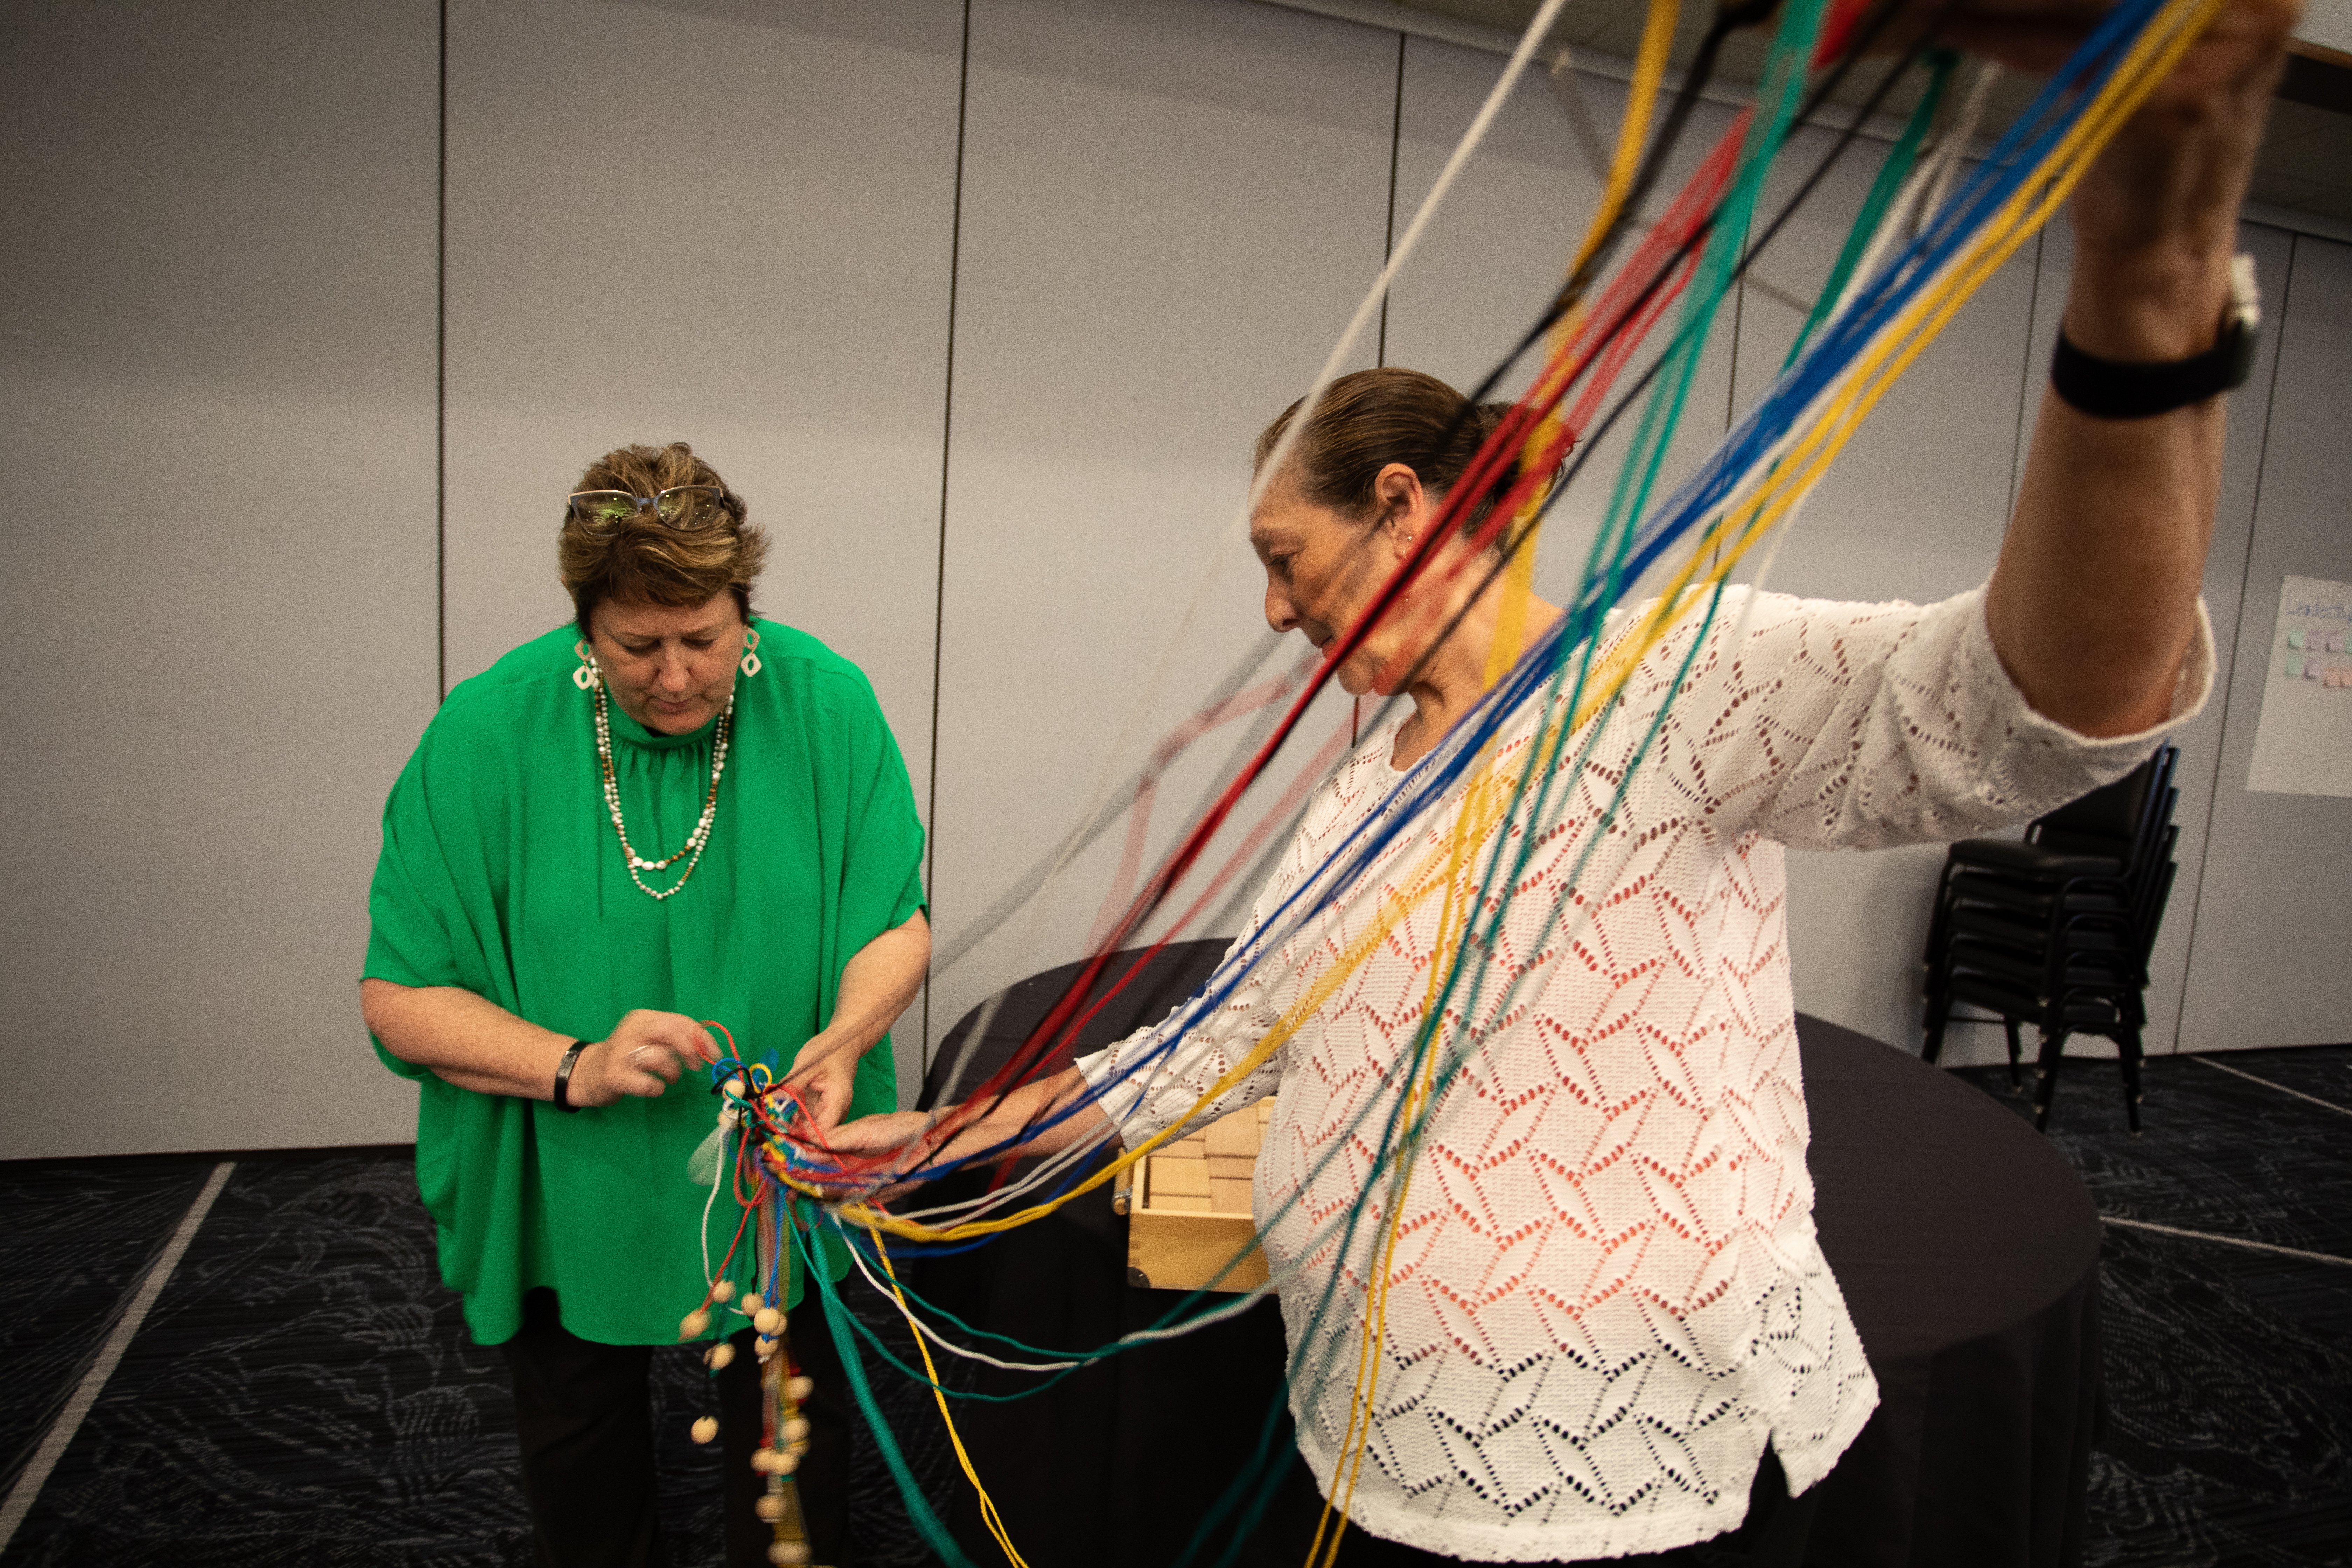 Jan Green and Nancy Rife work to untangle cords for a team-building exercise during Pathways | Award-Winning Talent Development Programs